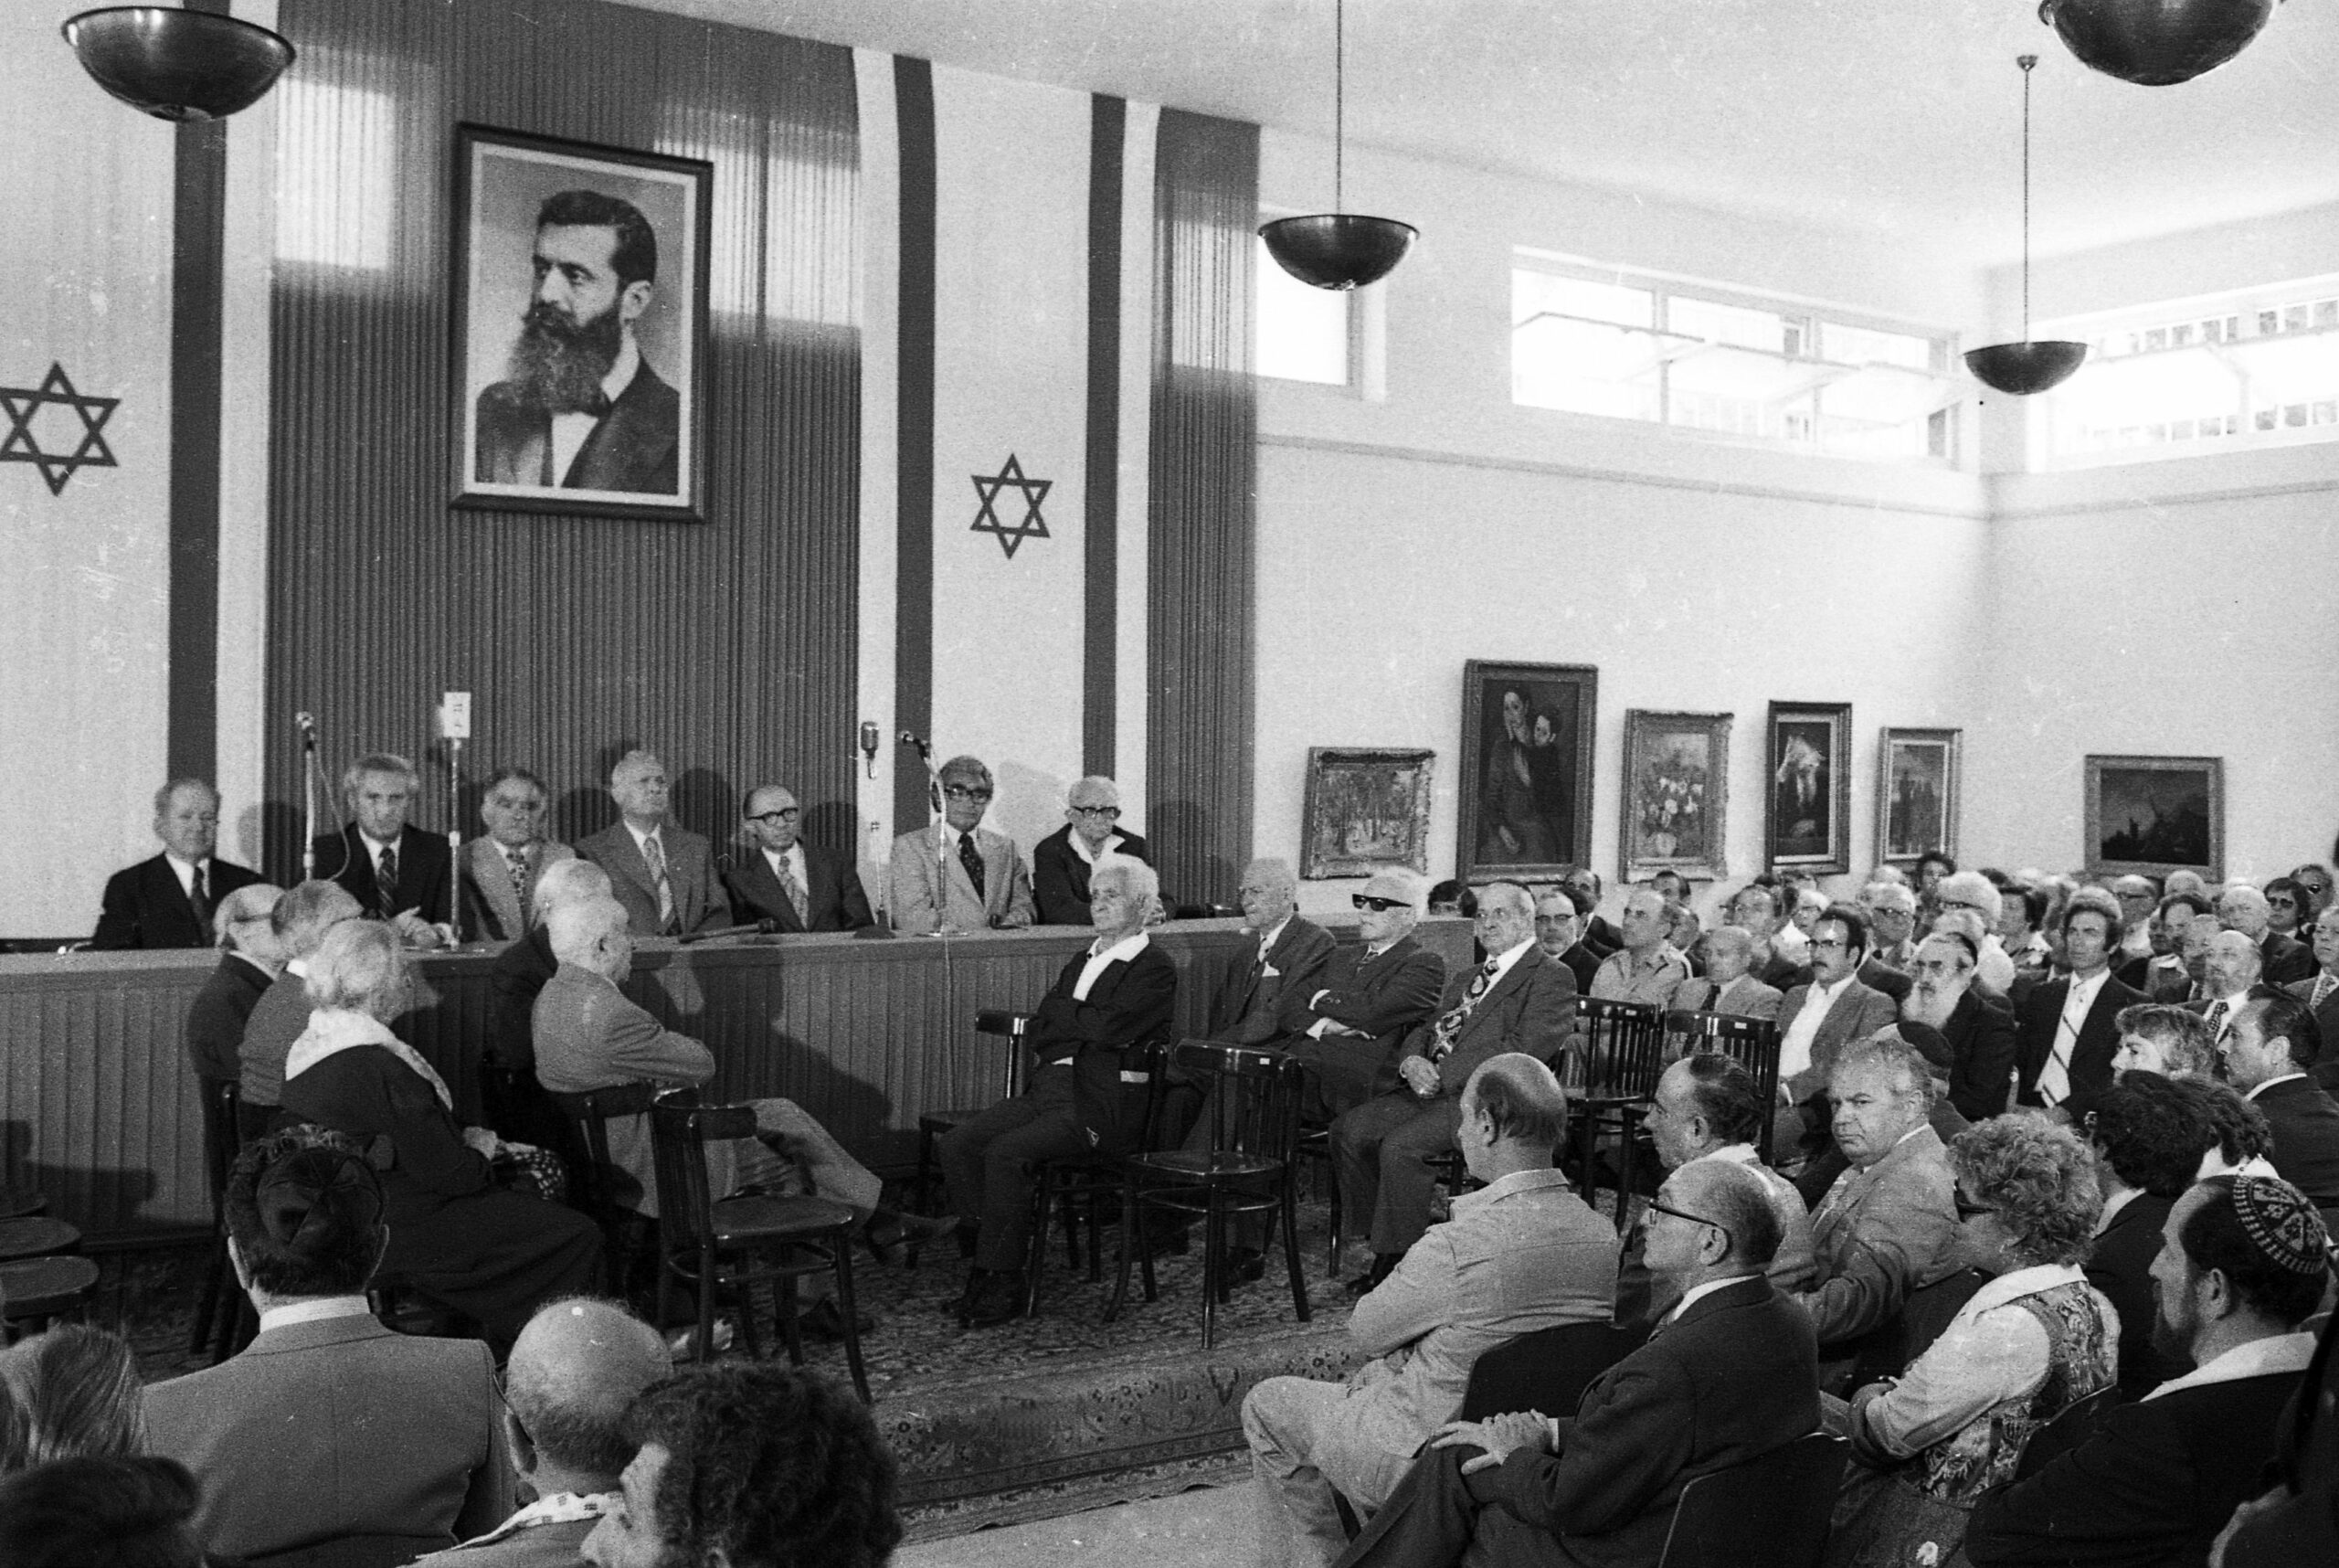 Prime Minister Menachem Begin (on dais) at a reenactment of the declaration ceremony at Independence Hall on May 11, 1978. Dan Hadani Collection, Pritzker Family National Photography Collection, National Library of Israel.

